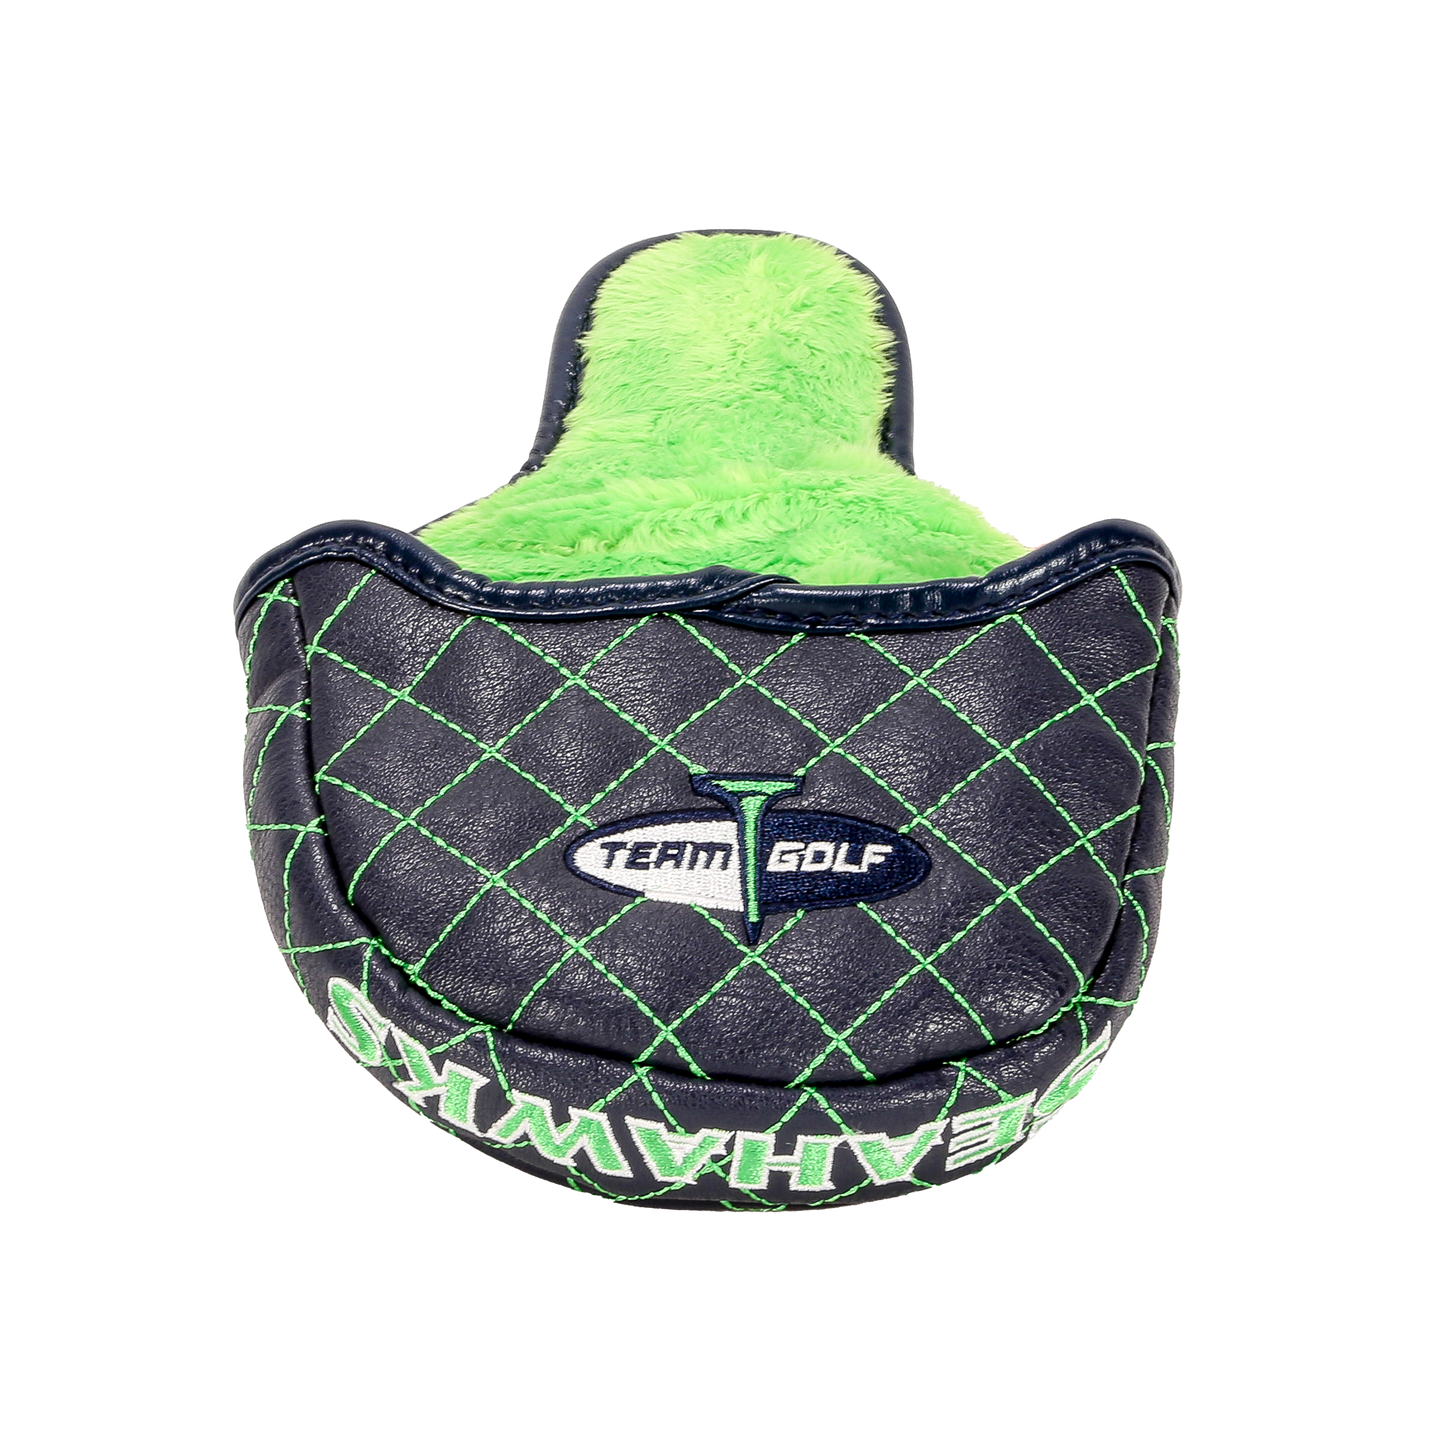 Seattle "Seahawks" Mallet Putter Cover